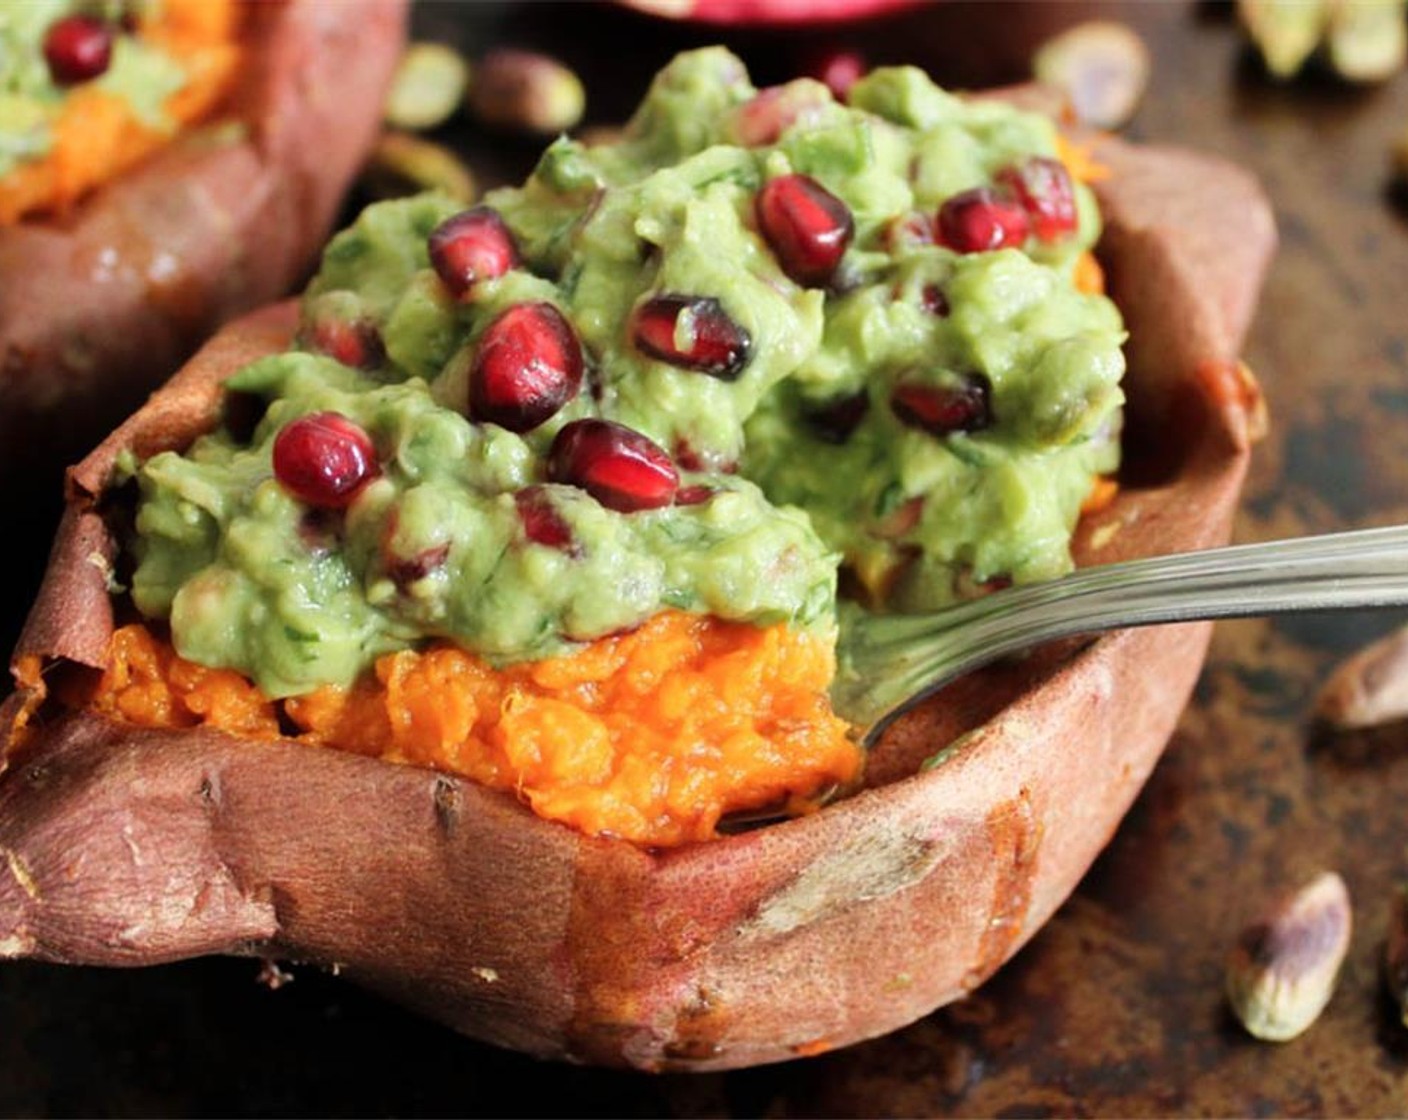 step 10 Top each sweet potato with plenty of pomegranate-pistachios guacamole, and shamelessly dig into your superfood sensation.